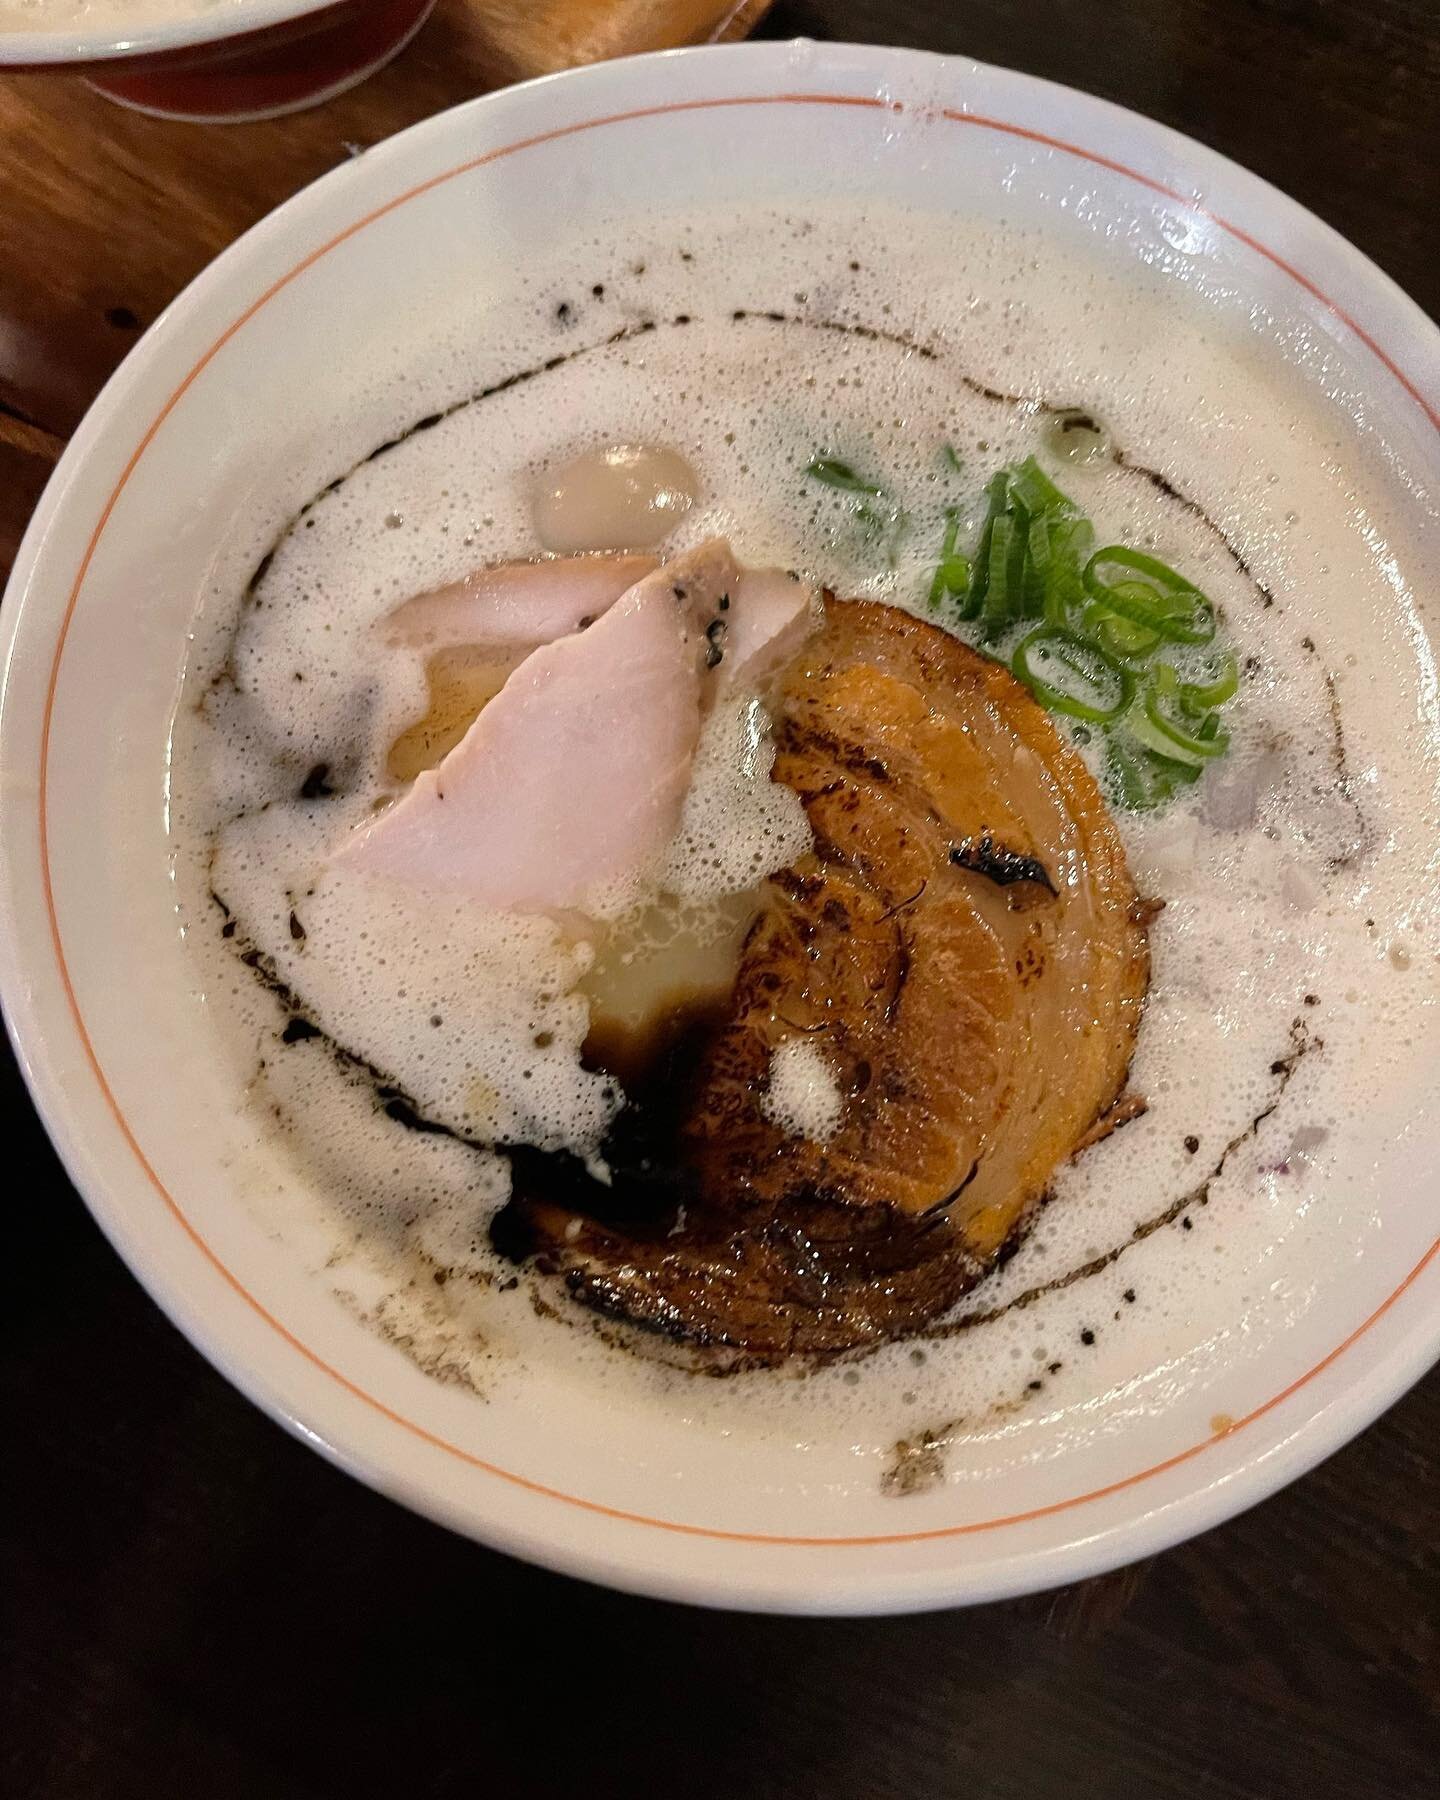 @tosakaramen is all about tori paitan ramen. A rich, wholesome chicken broth, bubbling away for 10 hours. Each bowl whisked to its signature foamy cloud top with a stick blender.

It was the most satisfying, can&rsquo;t-stop-thinking-about-it, bowl o